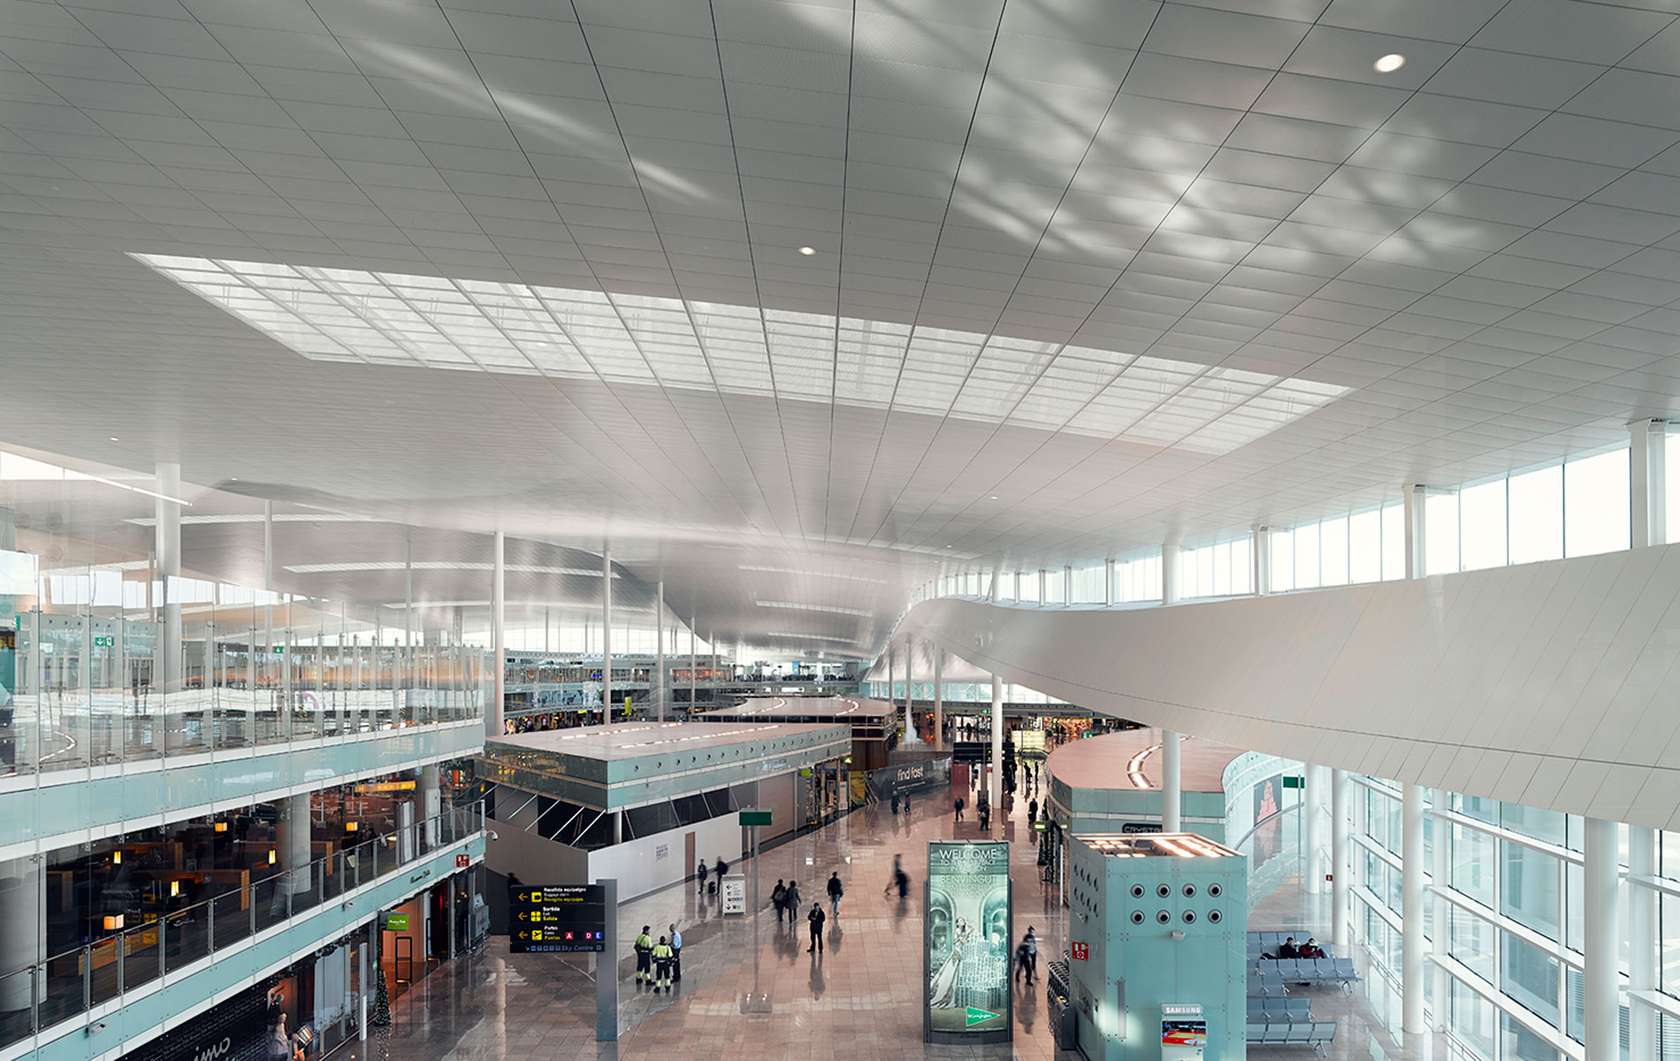 Terminal At Barcelona Airport Architizer